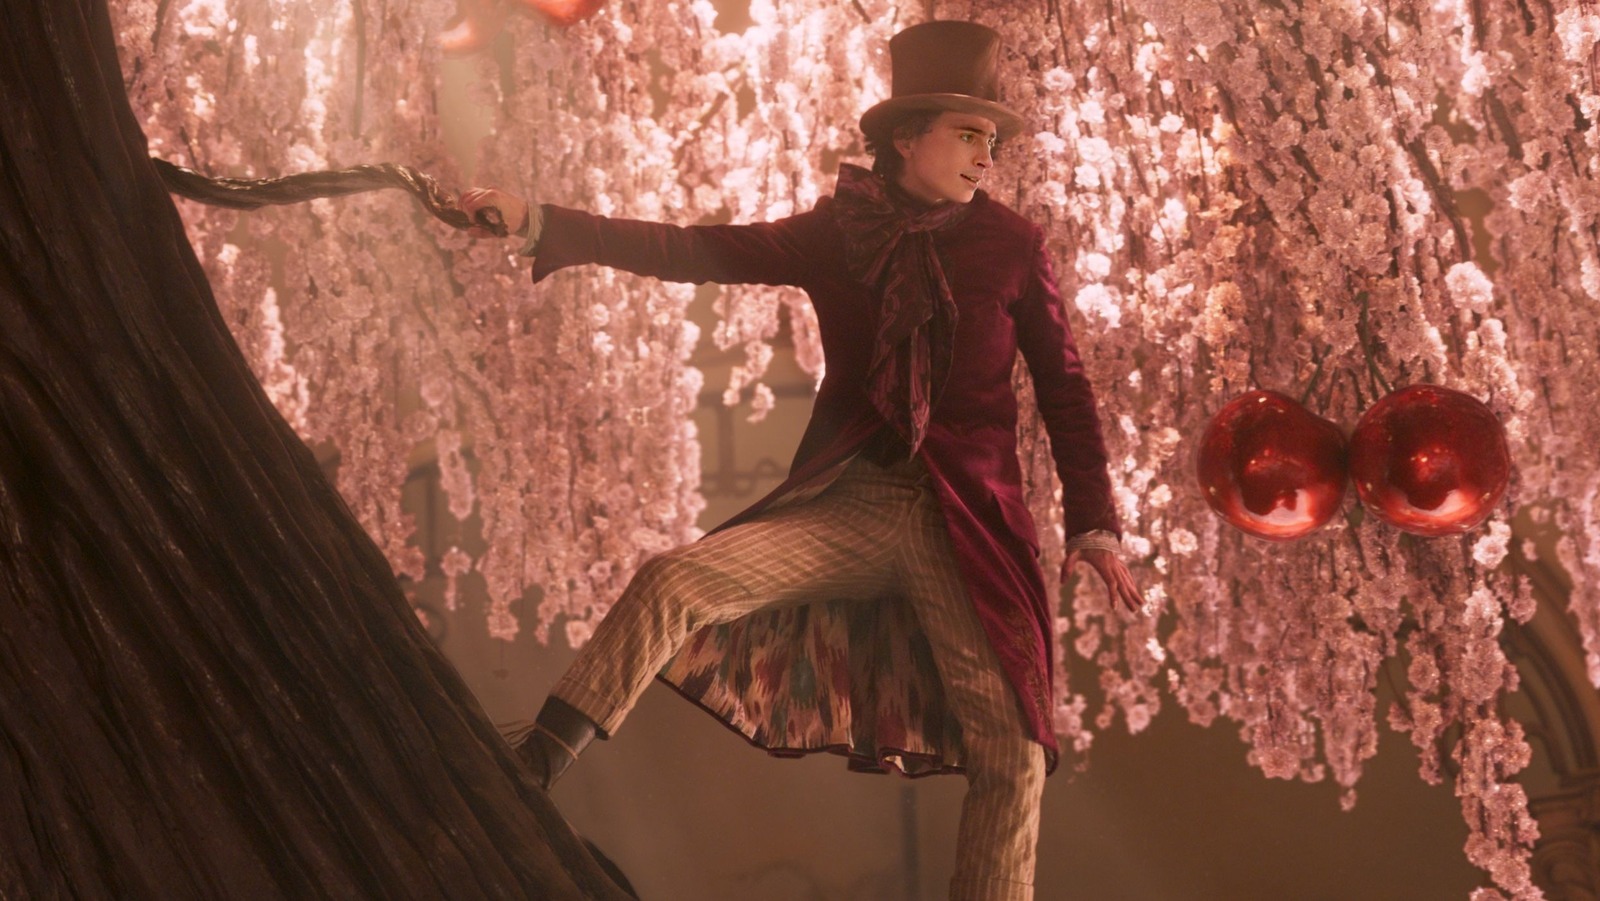 Wonka Director Paul King Is Already Working On Ideas For A Chocolatey Sequel